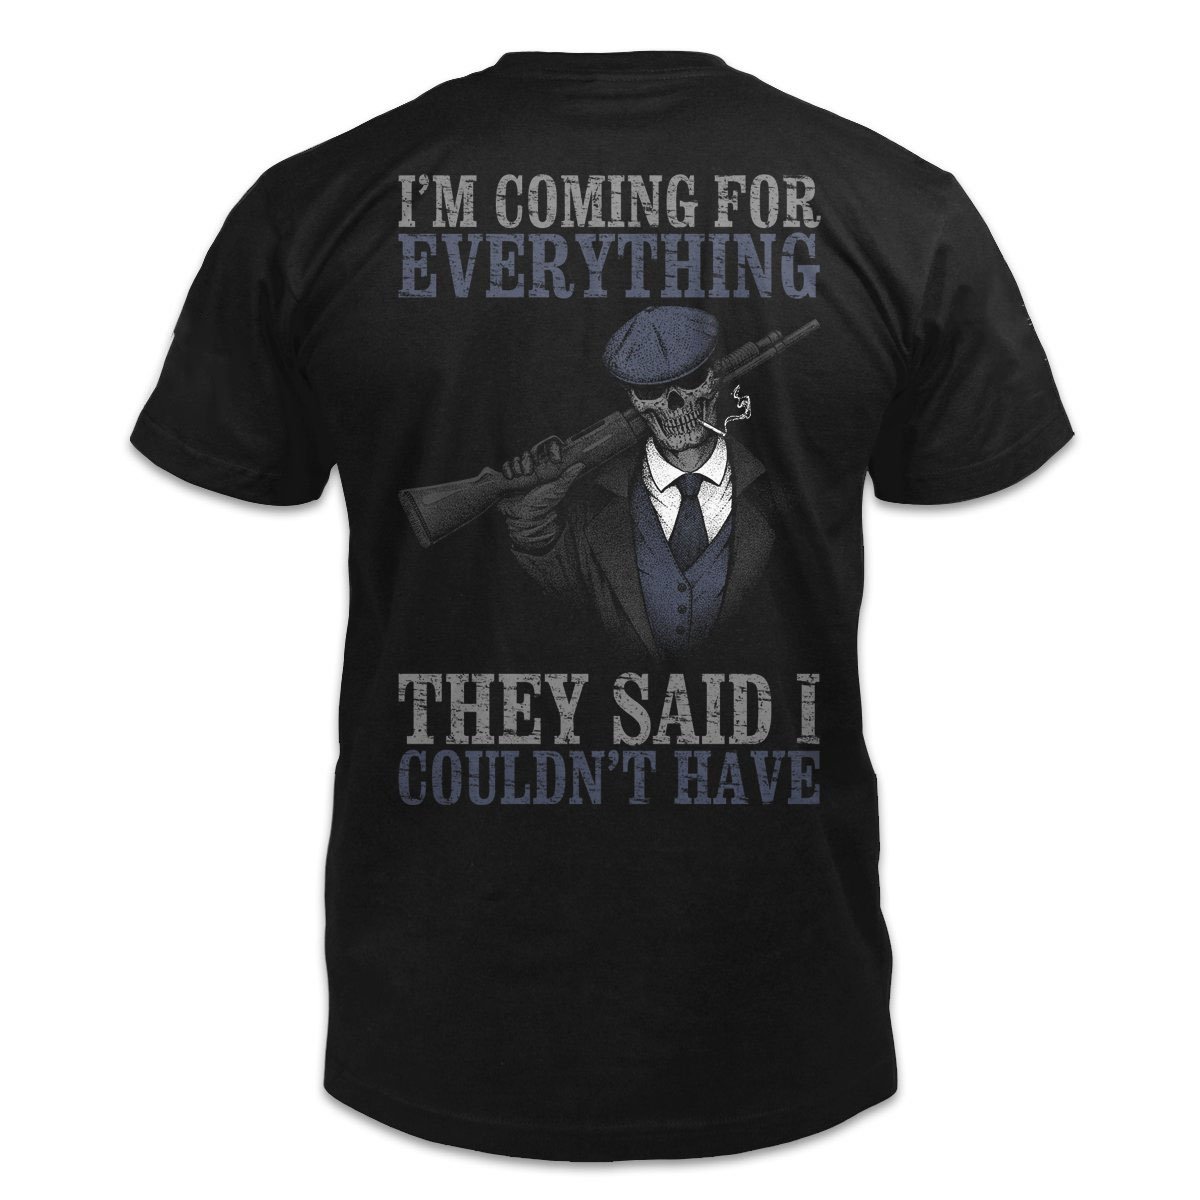 Veteran Shirt, I'm Coming For Everything They Said I Couldn't Have T-Shirt KM0507